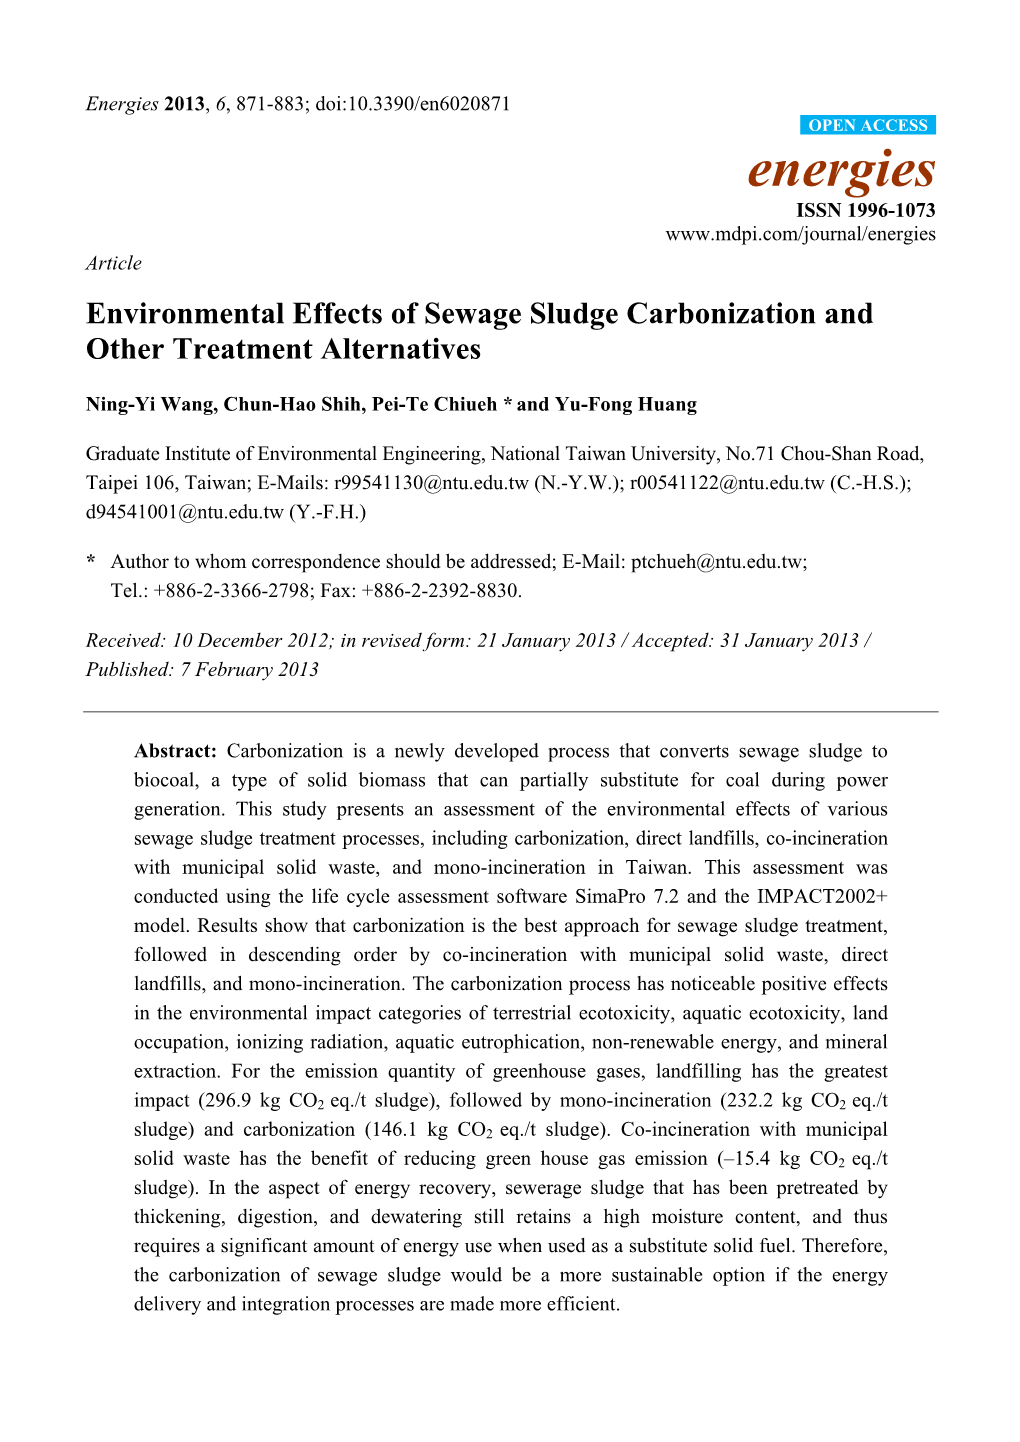 Environmental Effects of Sewage Sludge Carbonization and Other Treatment Alternatives